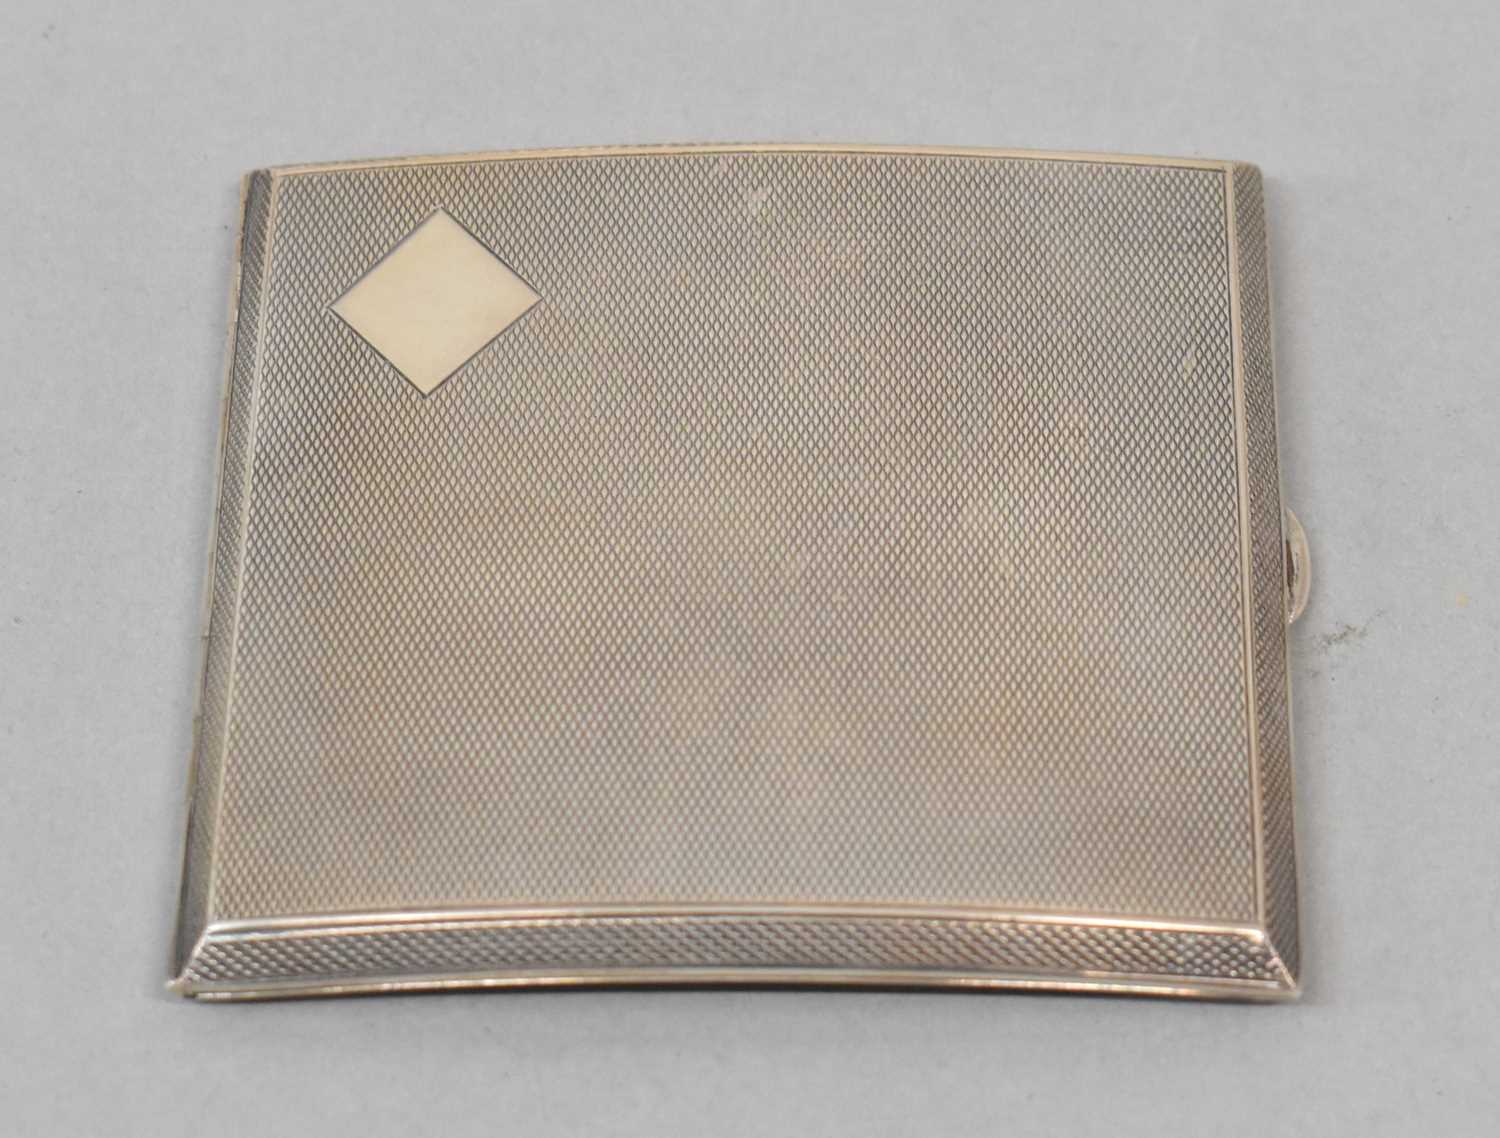 MAPPIN & WEBB; a George V hallmarked silver cigarette case of rectangular form with engine turned